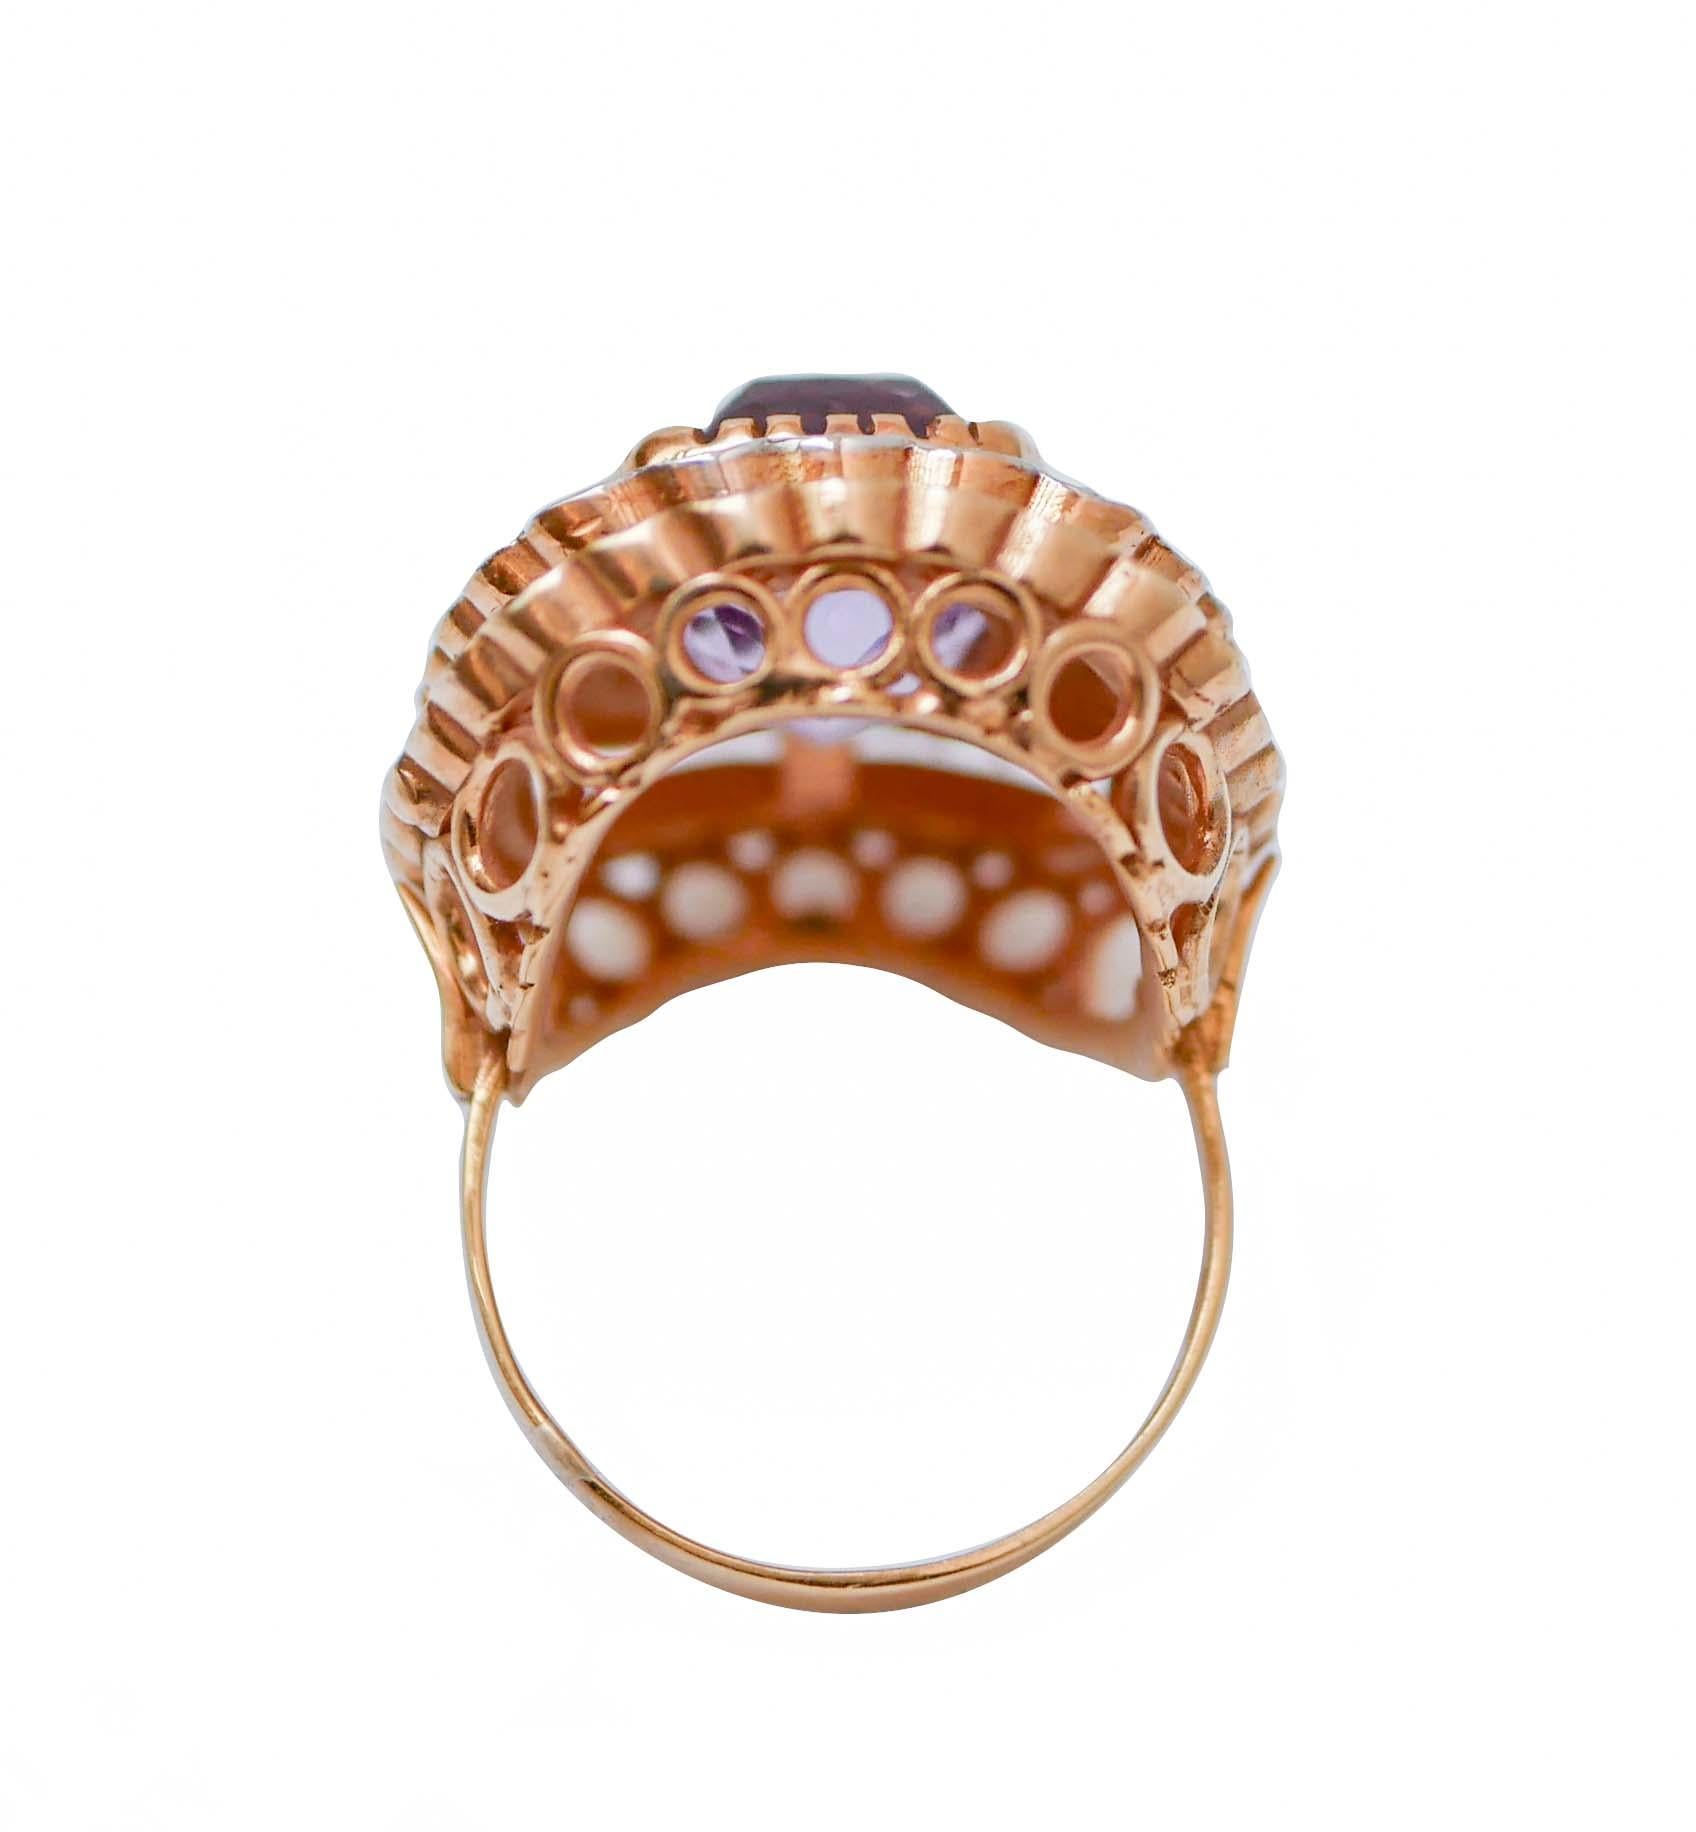 Retro Amethysts, Diamonds, Rose Gold and Silver Ring.